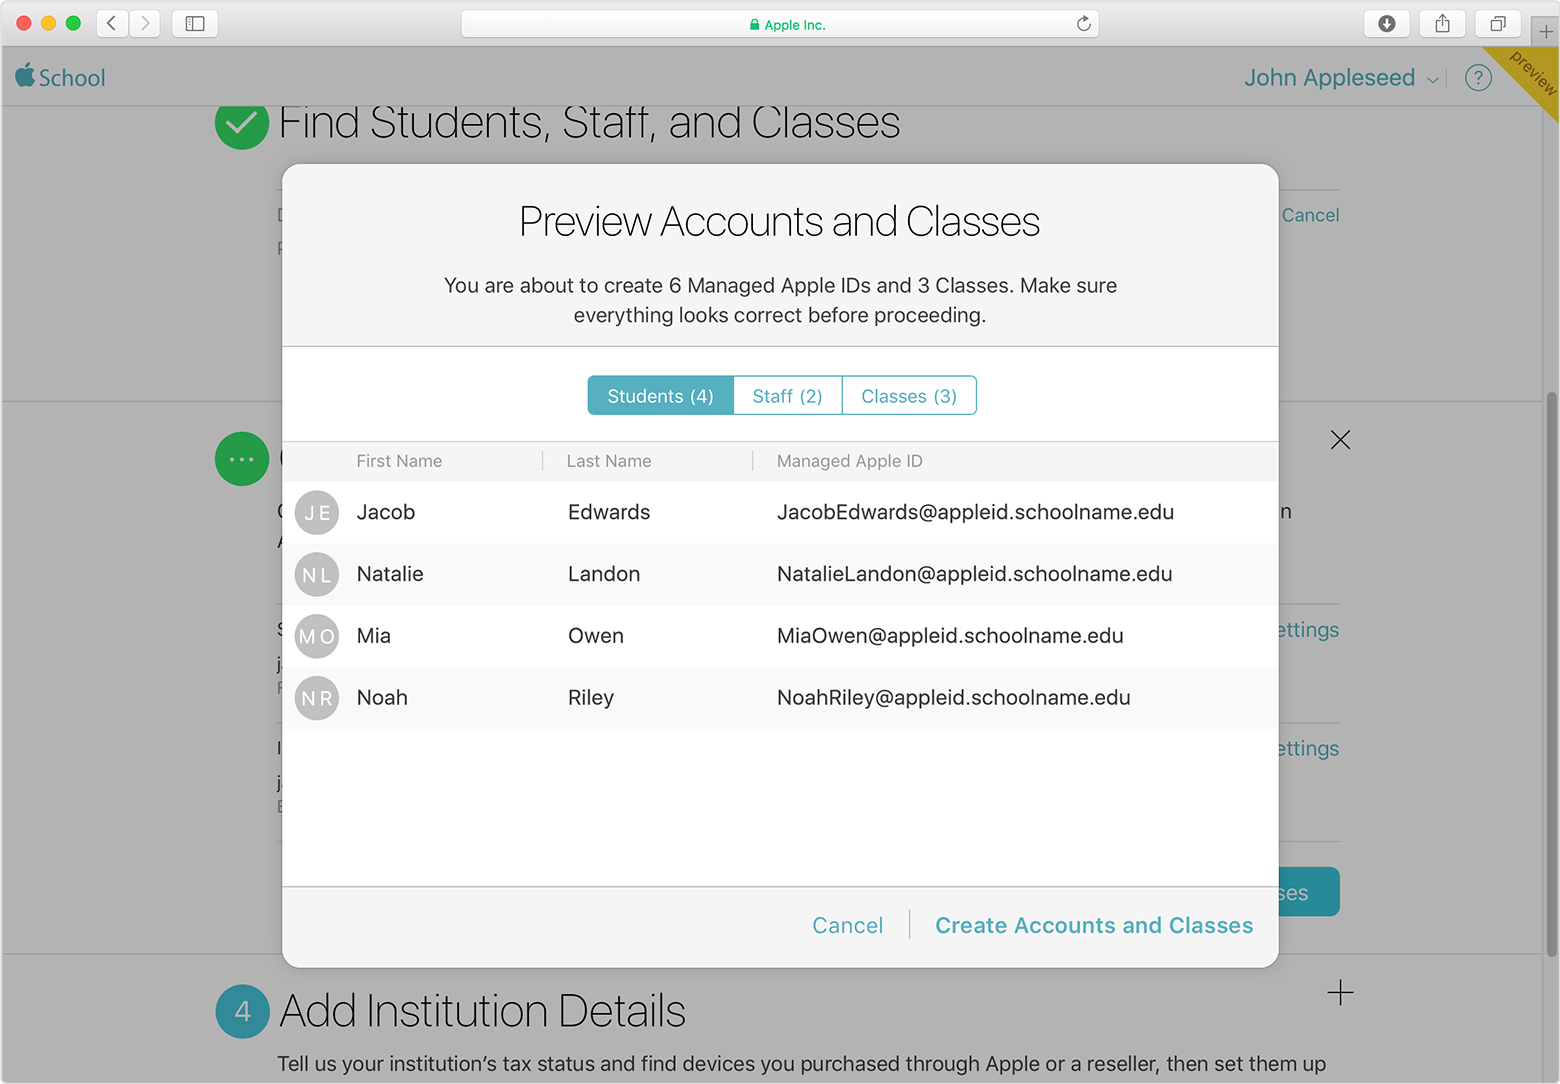 Apple Upload Pictures Under Create Accounts and Classes, choose a Managed Apple ID format for students, instructors, and staff. Click Preview Accounts and Classes.